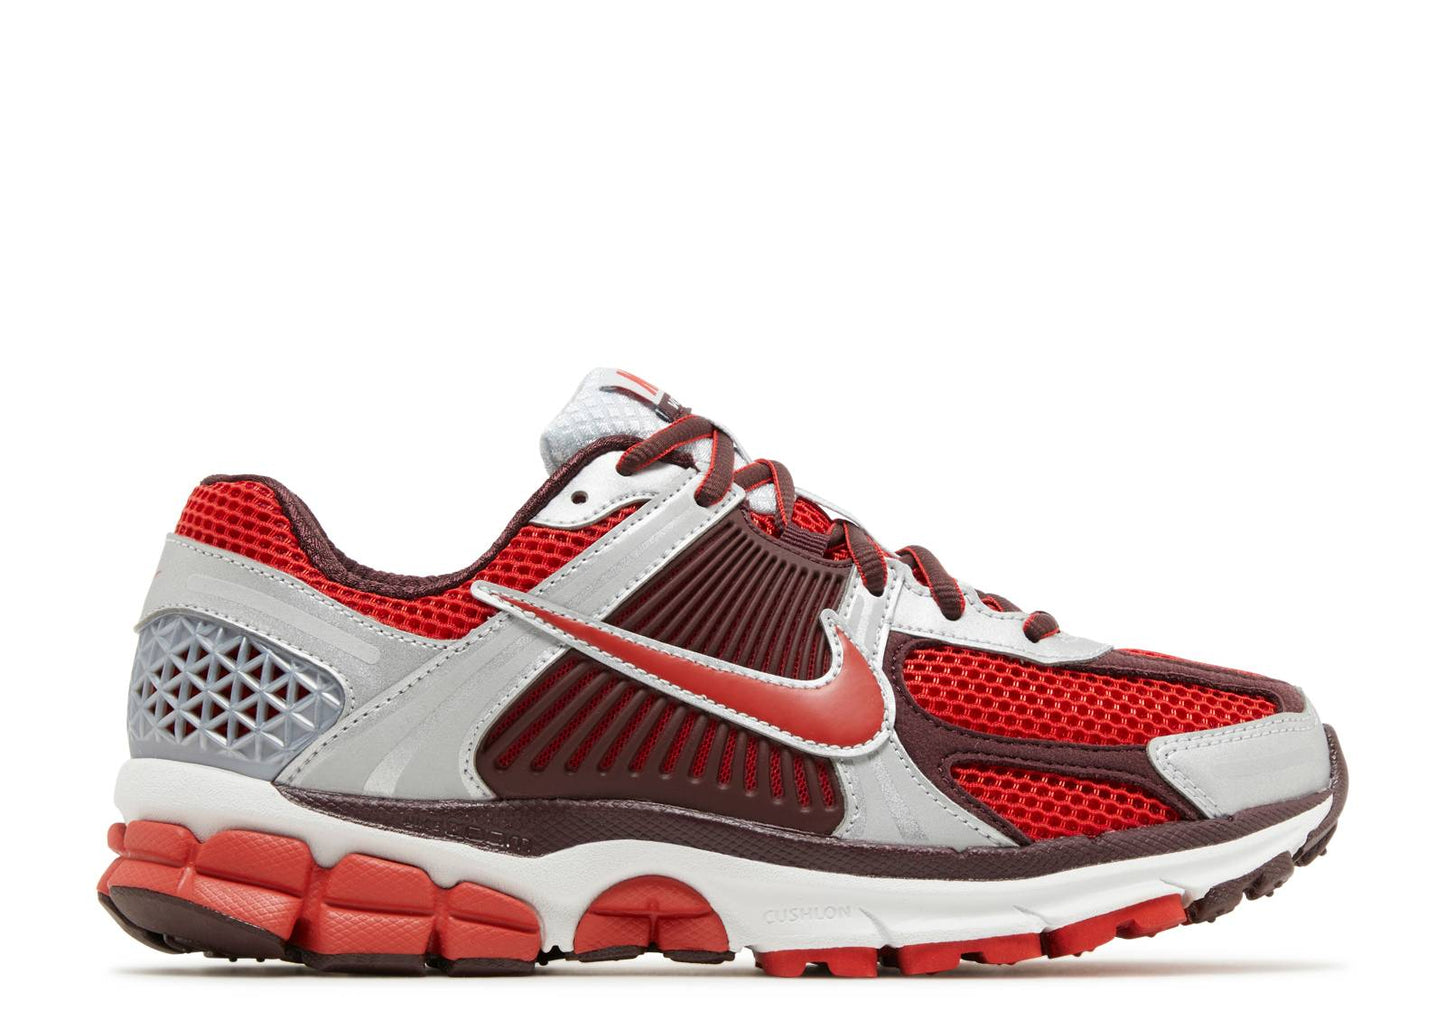 WMNS Nike Vomero 5 "Mystic Red"